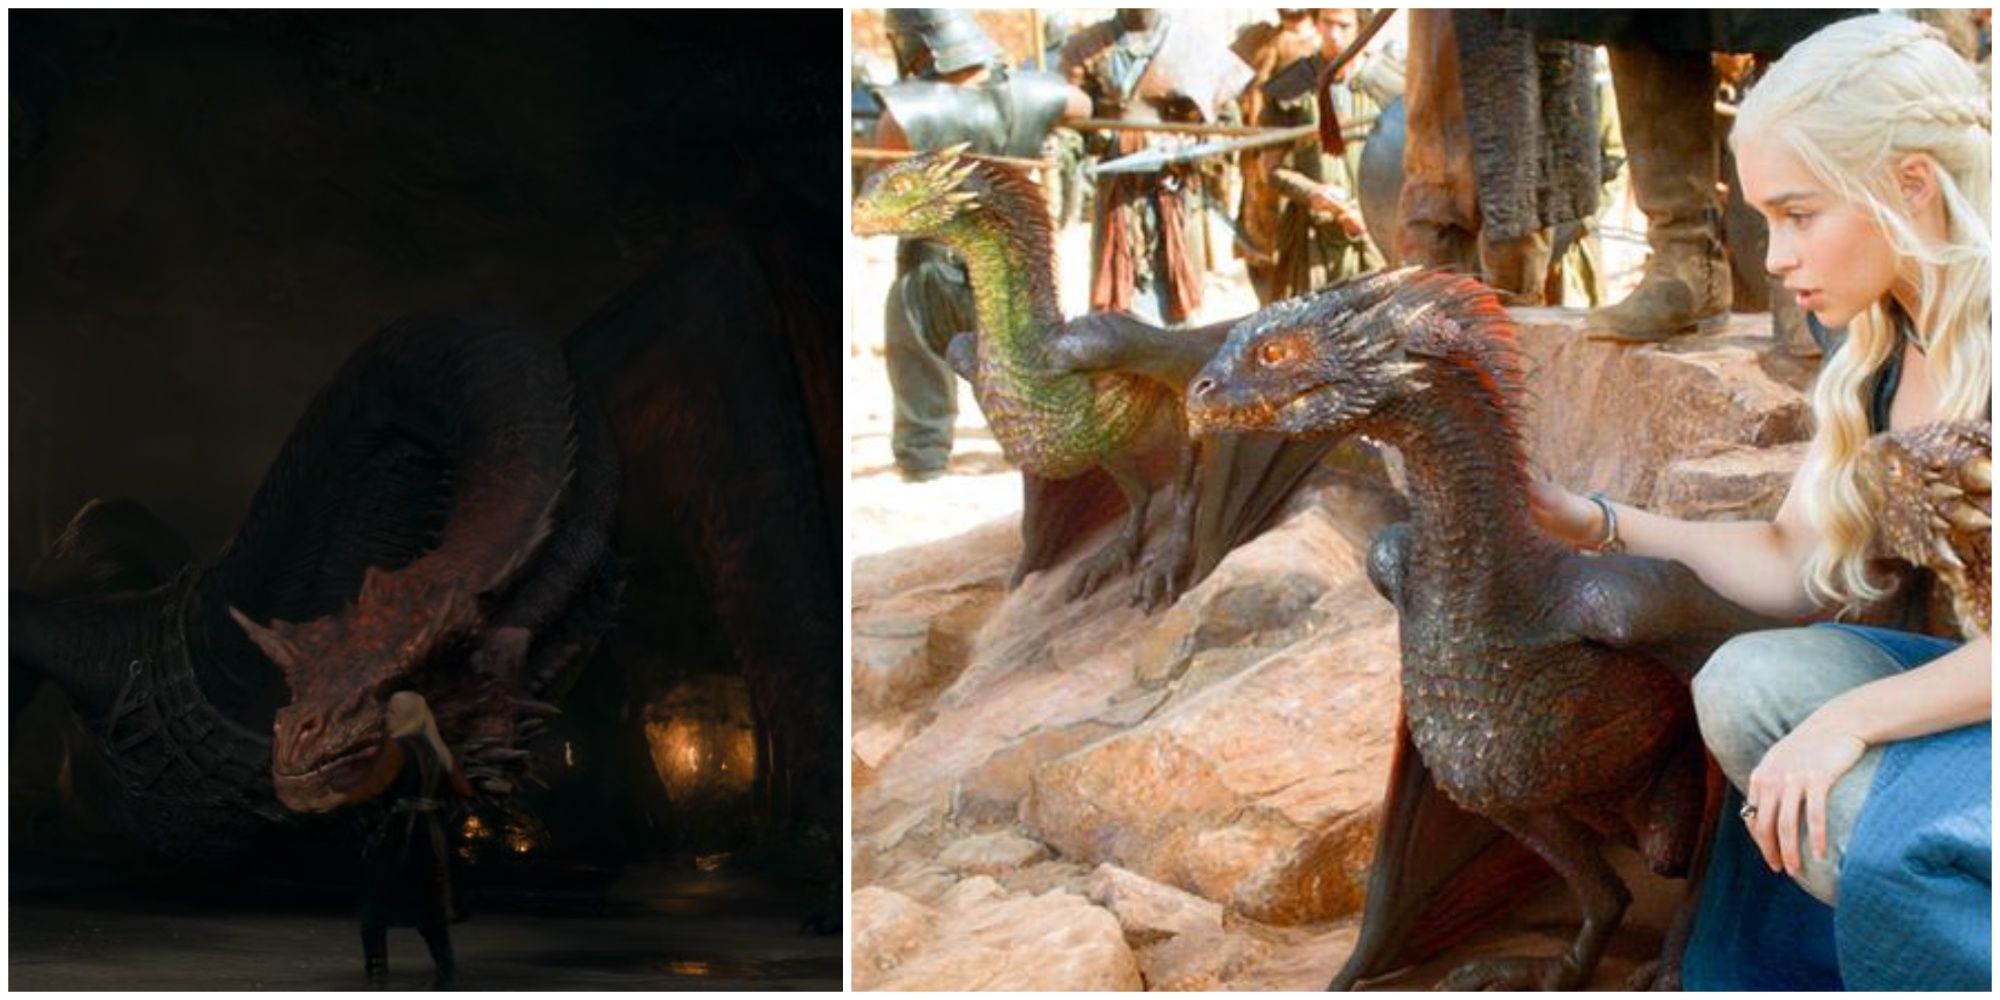 Daemon Targaryen and Caraxes and Daenerys with Drogon Viserion and Rhaegal in the Game of Thrones universe.